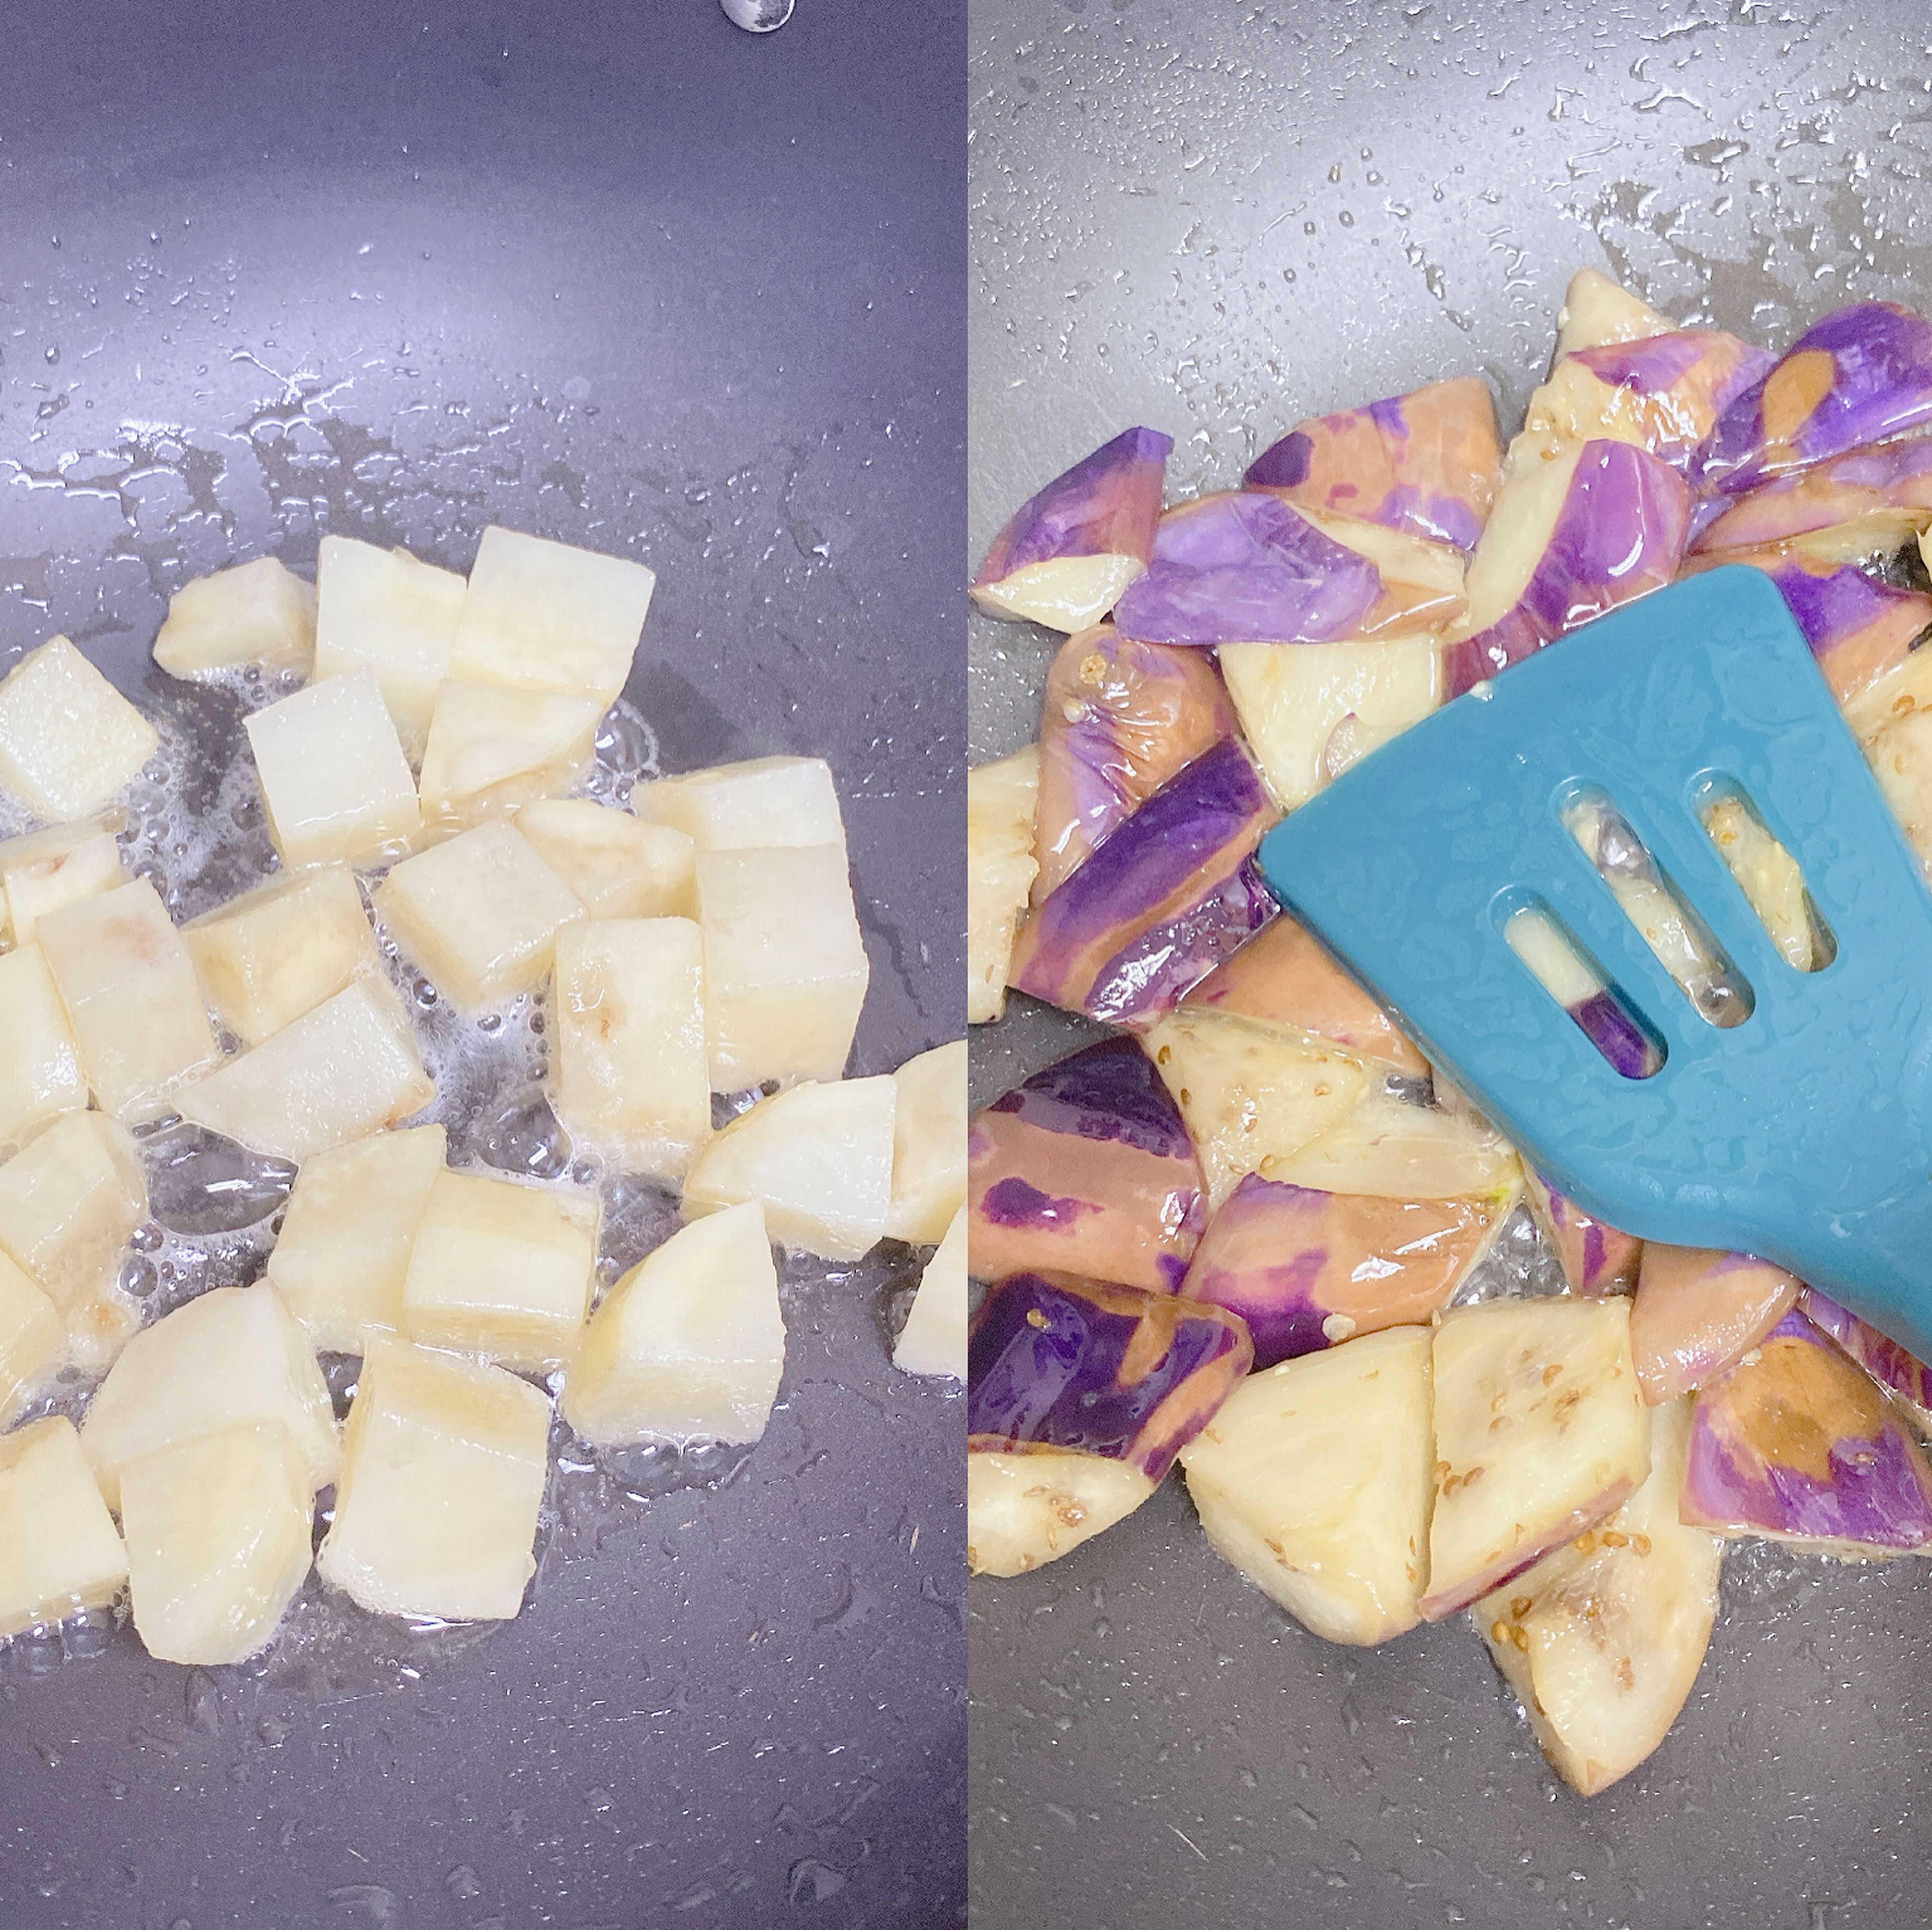 Fry the three vegetables individually until they’re cooked. I like to microwave the potatoes and eggplants each for 2 minutes to speed up the process. After that, it typically takes me 8 minutes to fully cook the potato cubes, 5 minutes for the eggplants, and 20 seconds for the peppers.